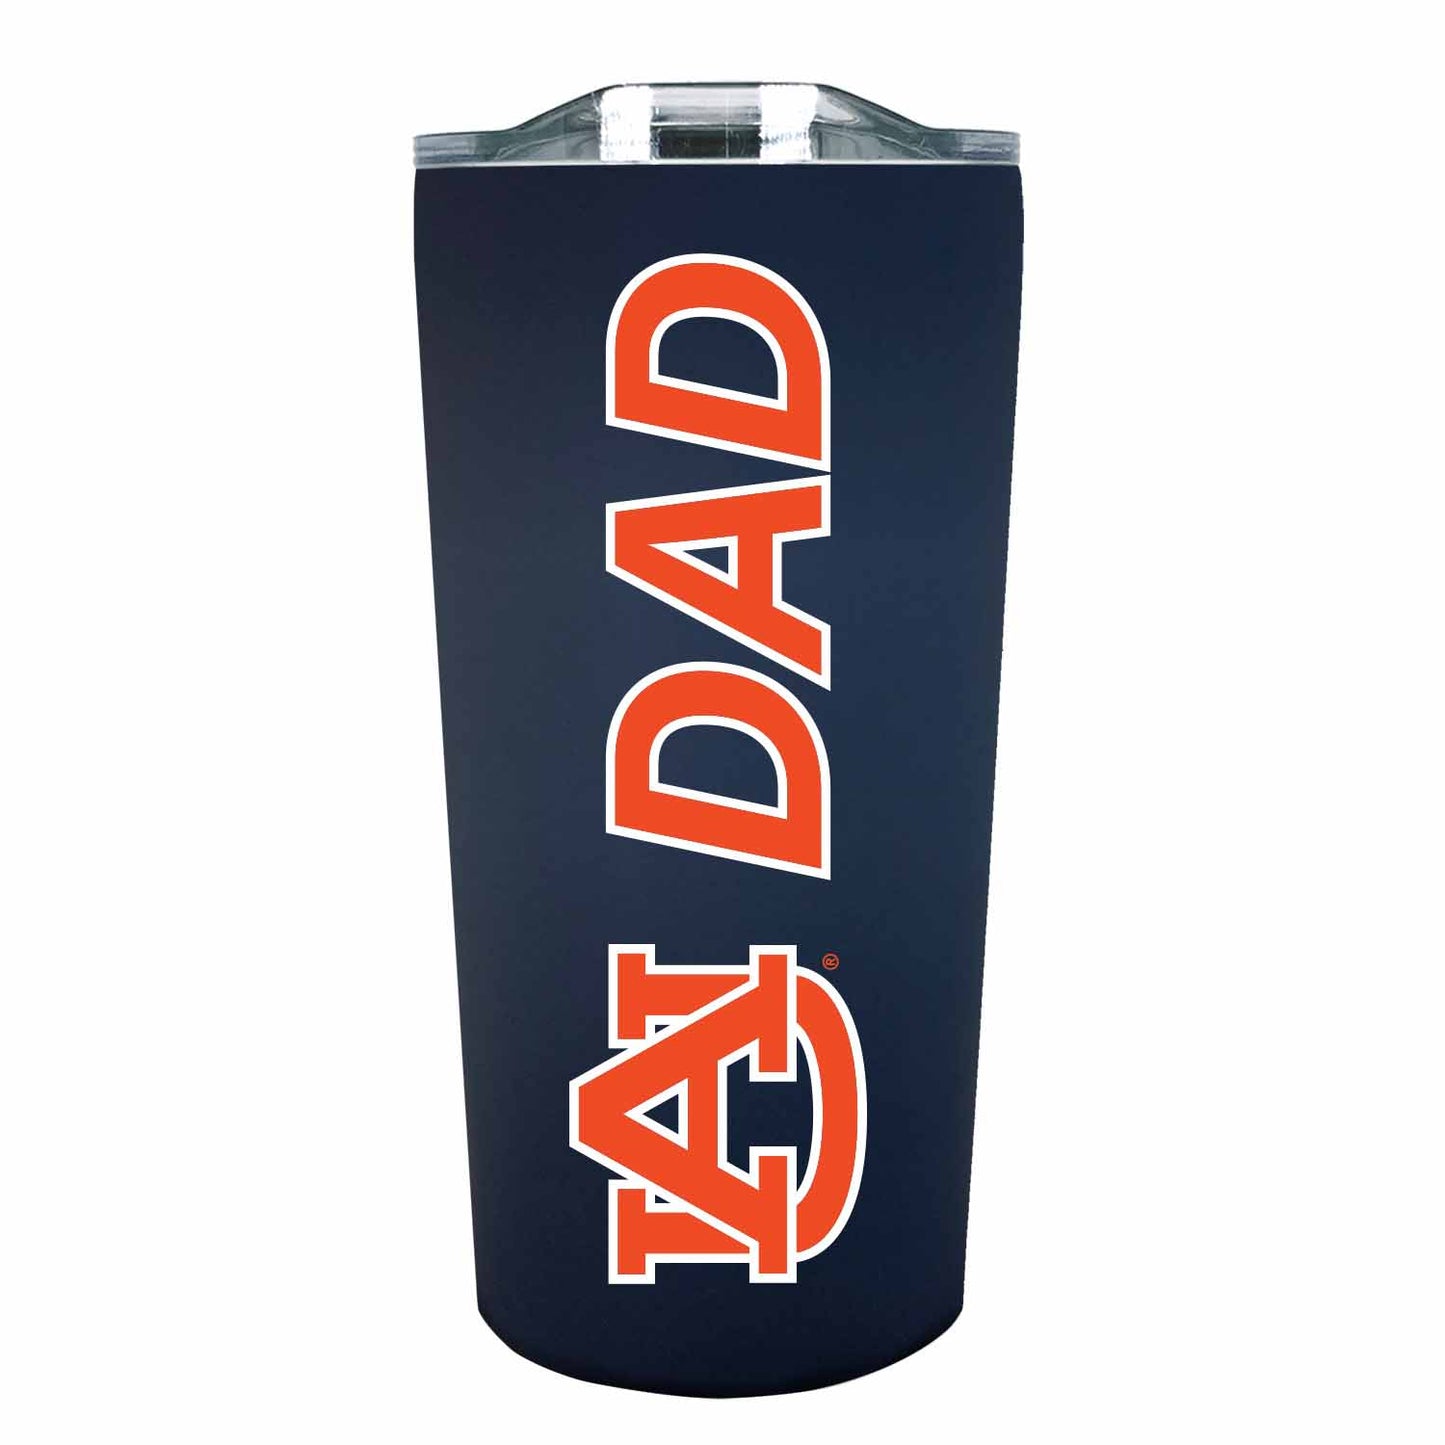 Auburn Tigers NCAA Stainless Steel Travel Tumbler for Dad - Navy